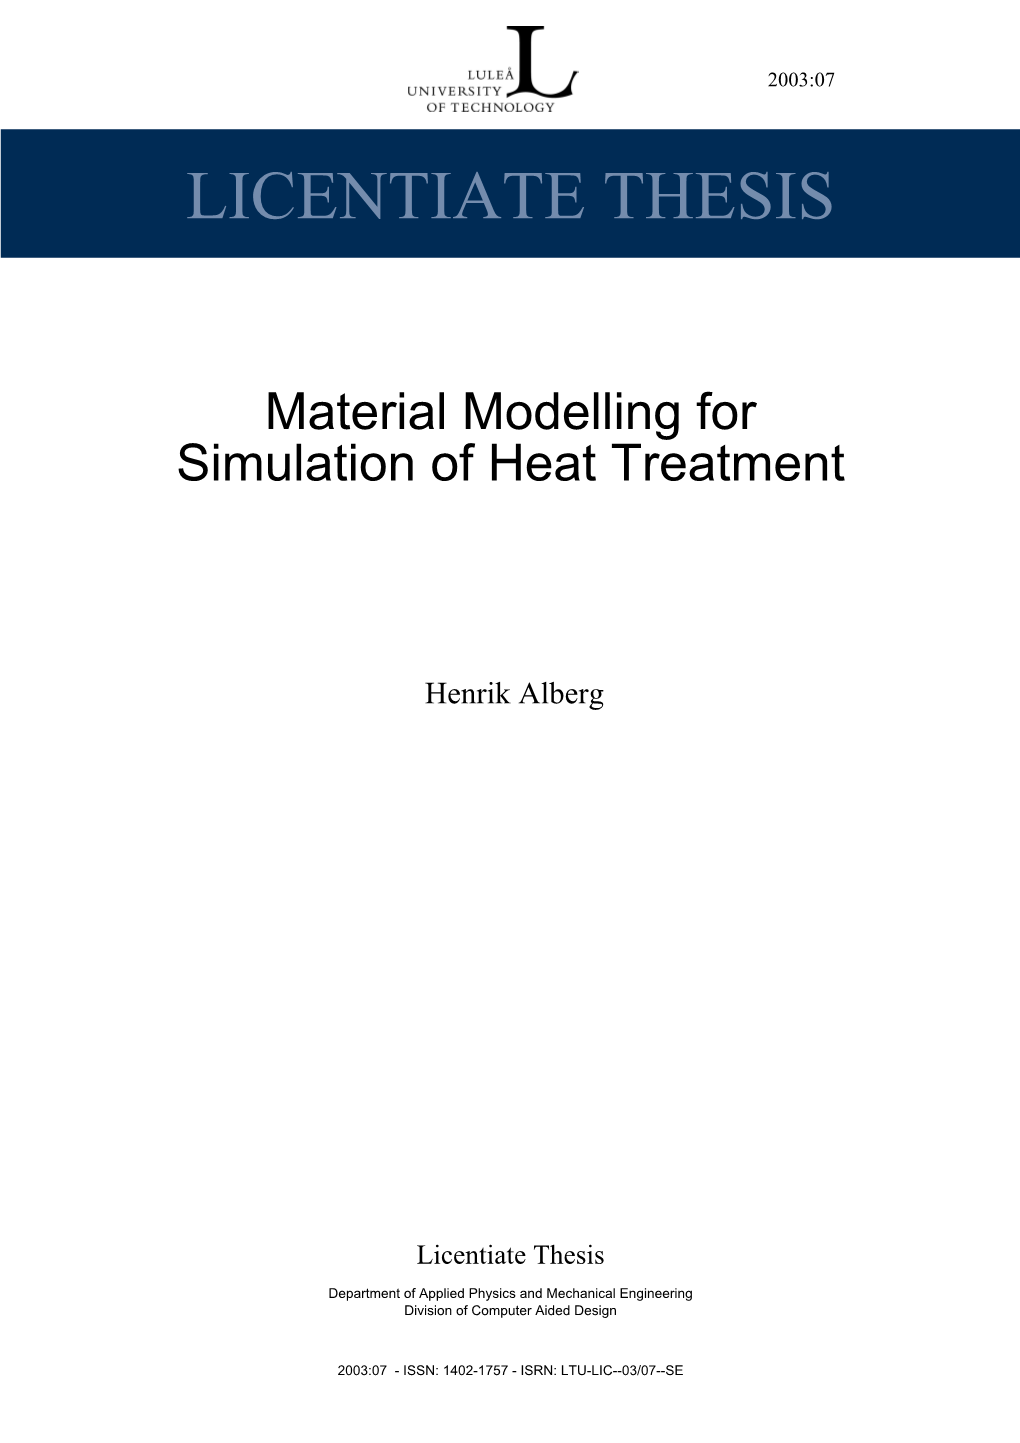 Material Modelling for Simulation of Heat Treatment